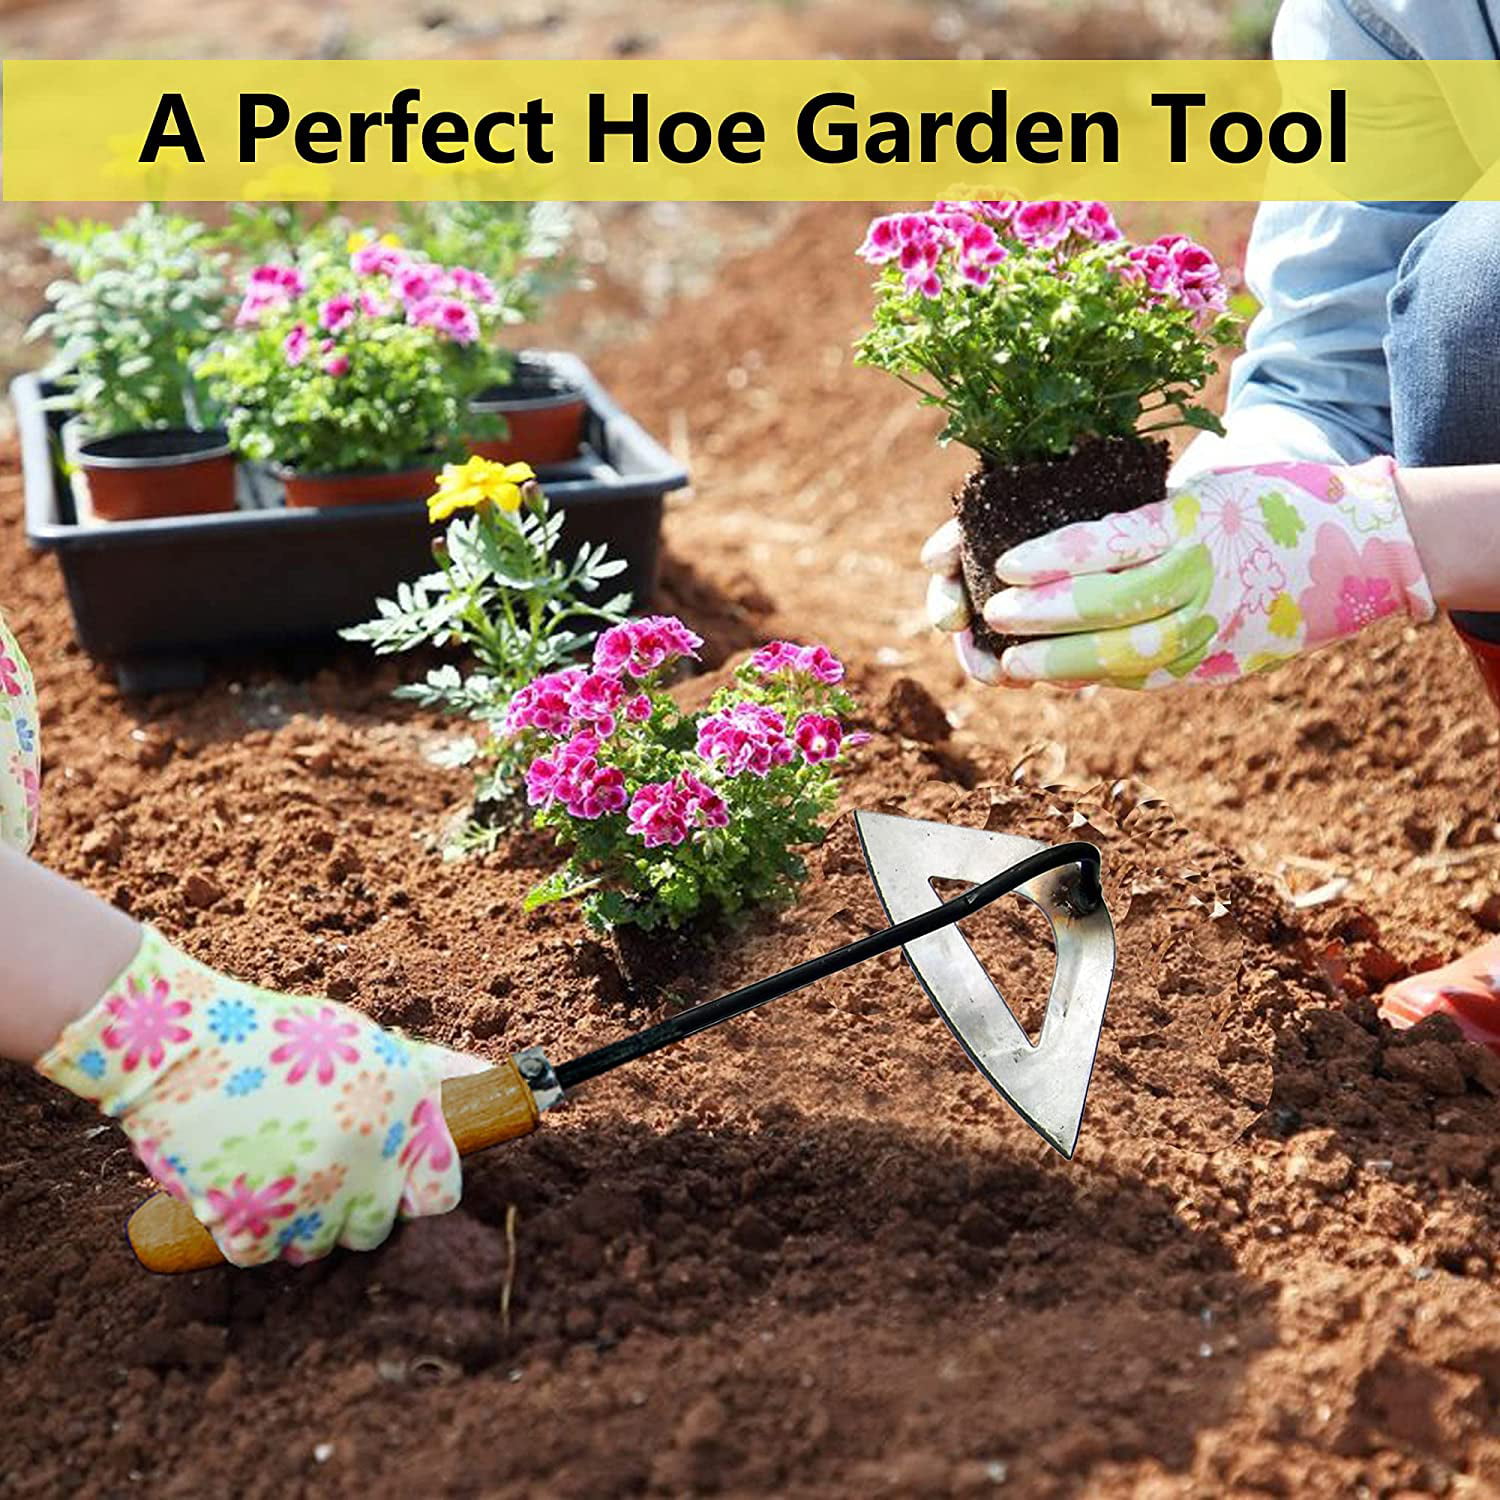 Gardening Tools Hand Hoe Shovel Weed Puller Accessories Sharp Durable Gardening Gifts for Women Hoe Garden Tool Traditional Manganese Steel Quenching Forging Process 